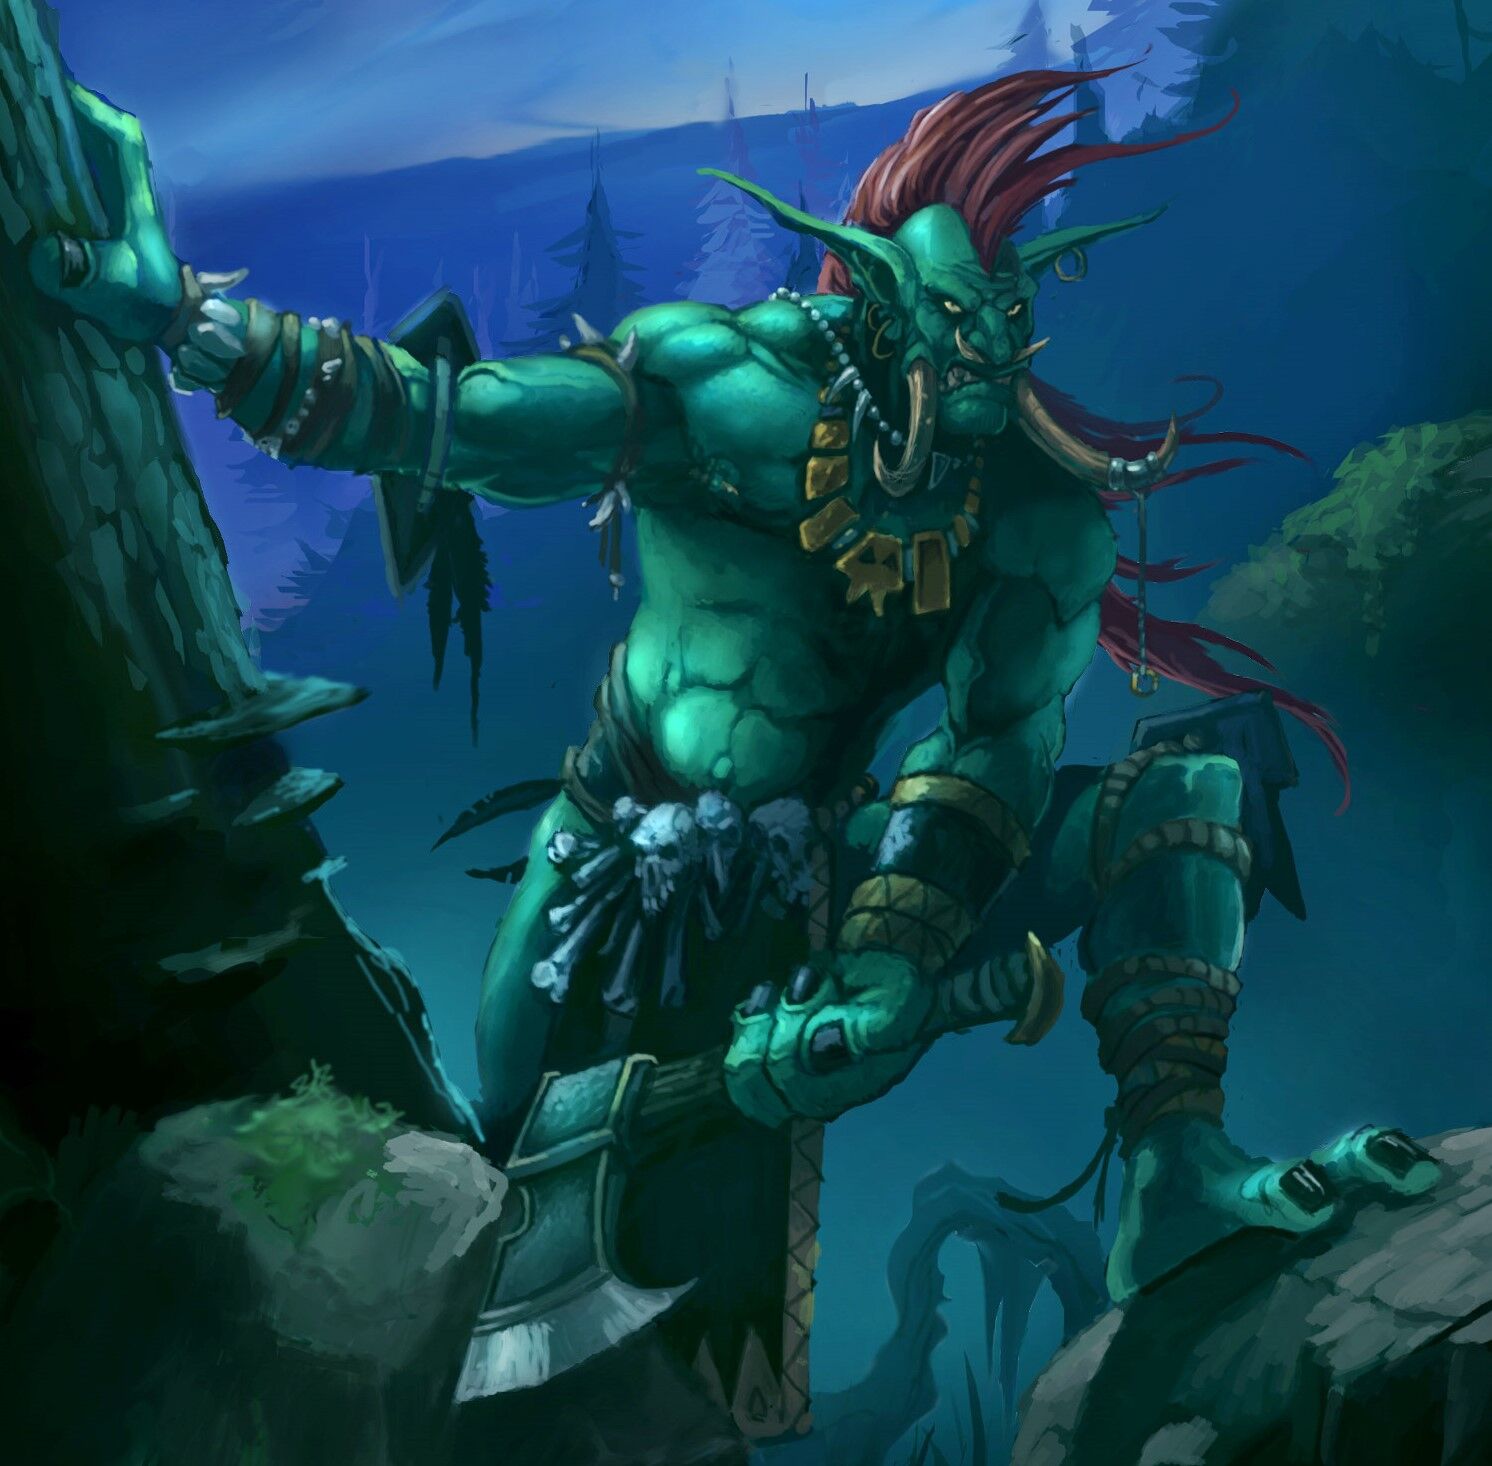 Get tangled As well Completely dry Troll - Wowpedia - Your wiki guide to the World of Warcraft